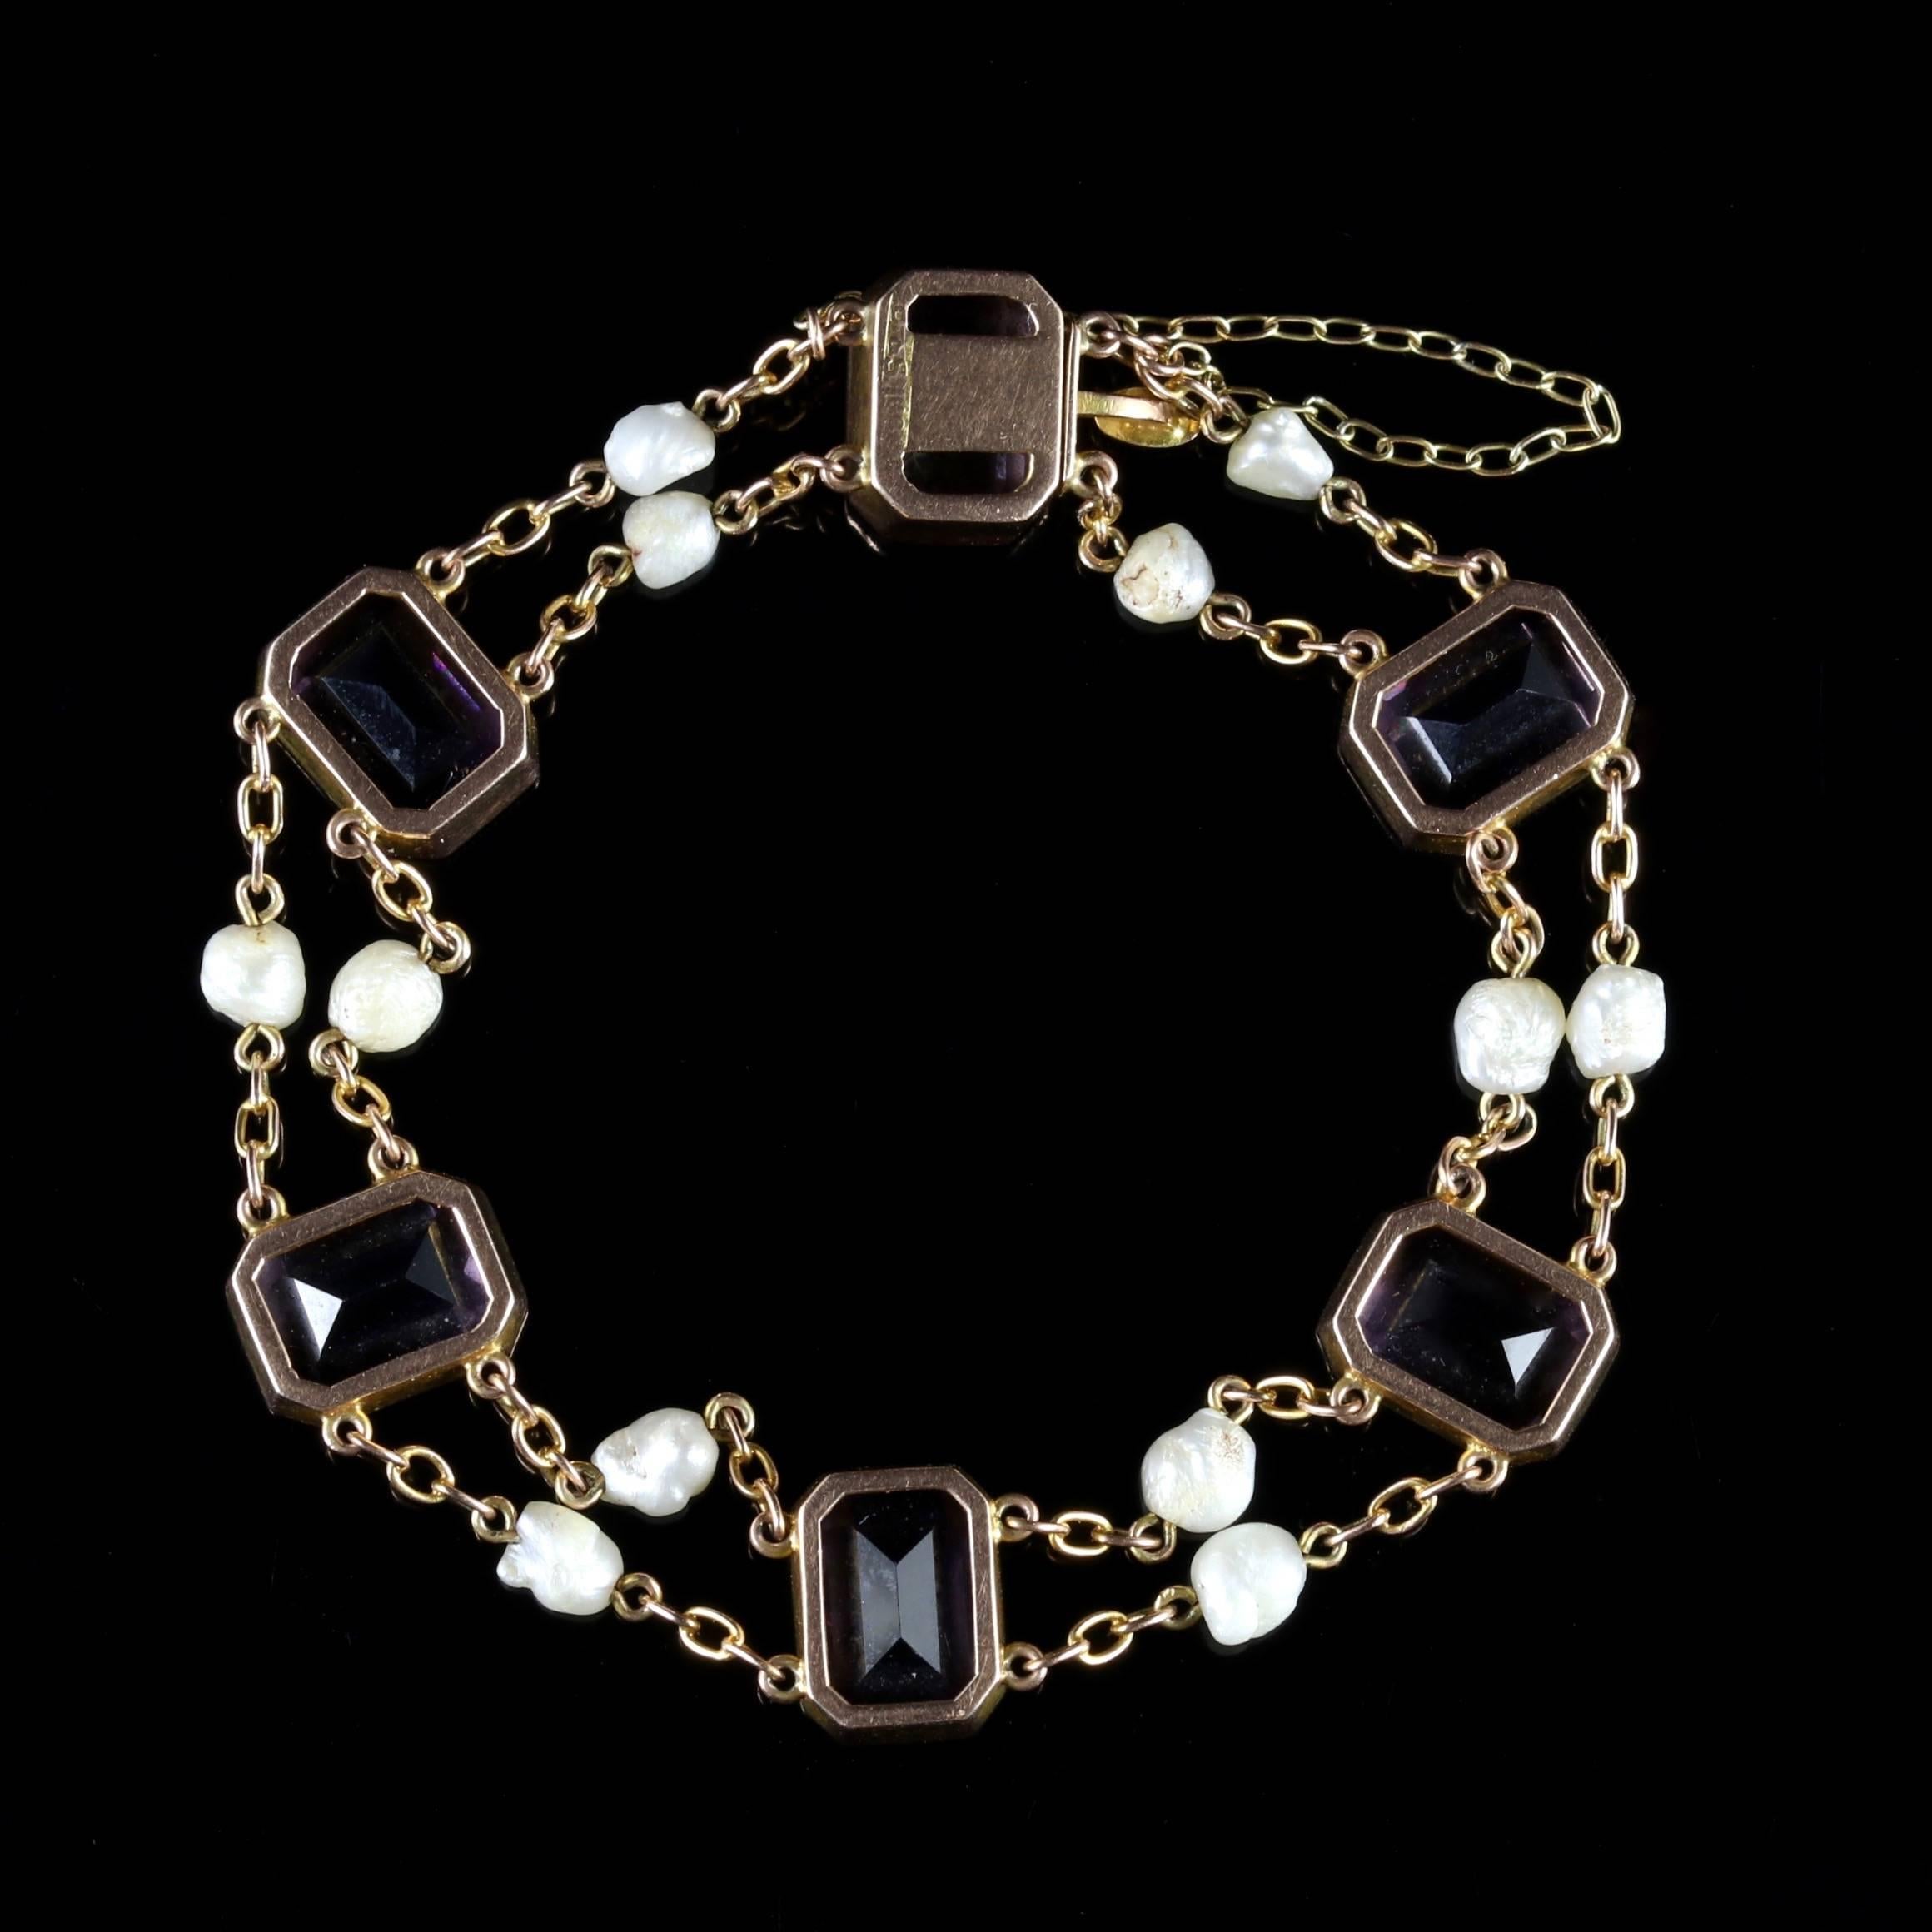 This beautiful Victorian 18ct Gold Amethyst and natural Pearl bracelet is Circa 1900.

Each link is adorned in wonderful Pearls that lead to the 4.0ct deep, purple Amethysts.

Amethyst has been highly esteemed throughout the ages for its stunning